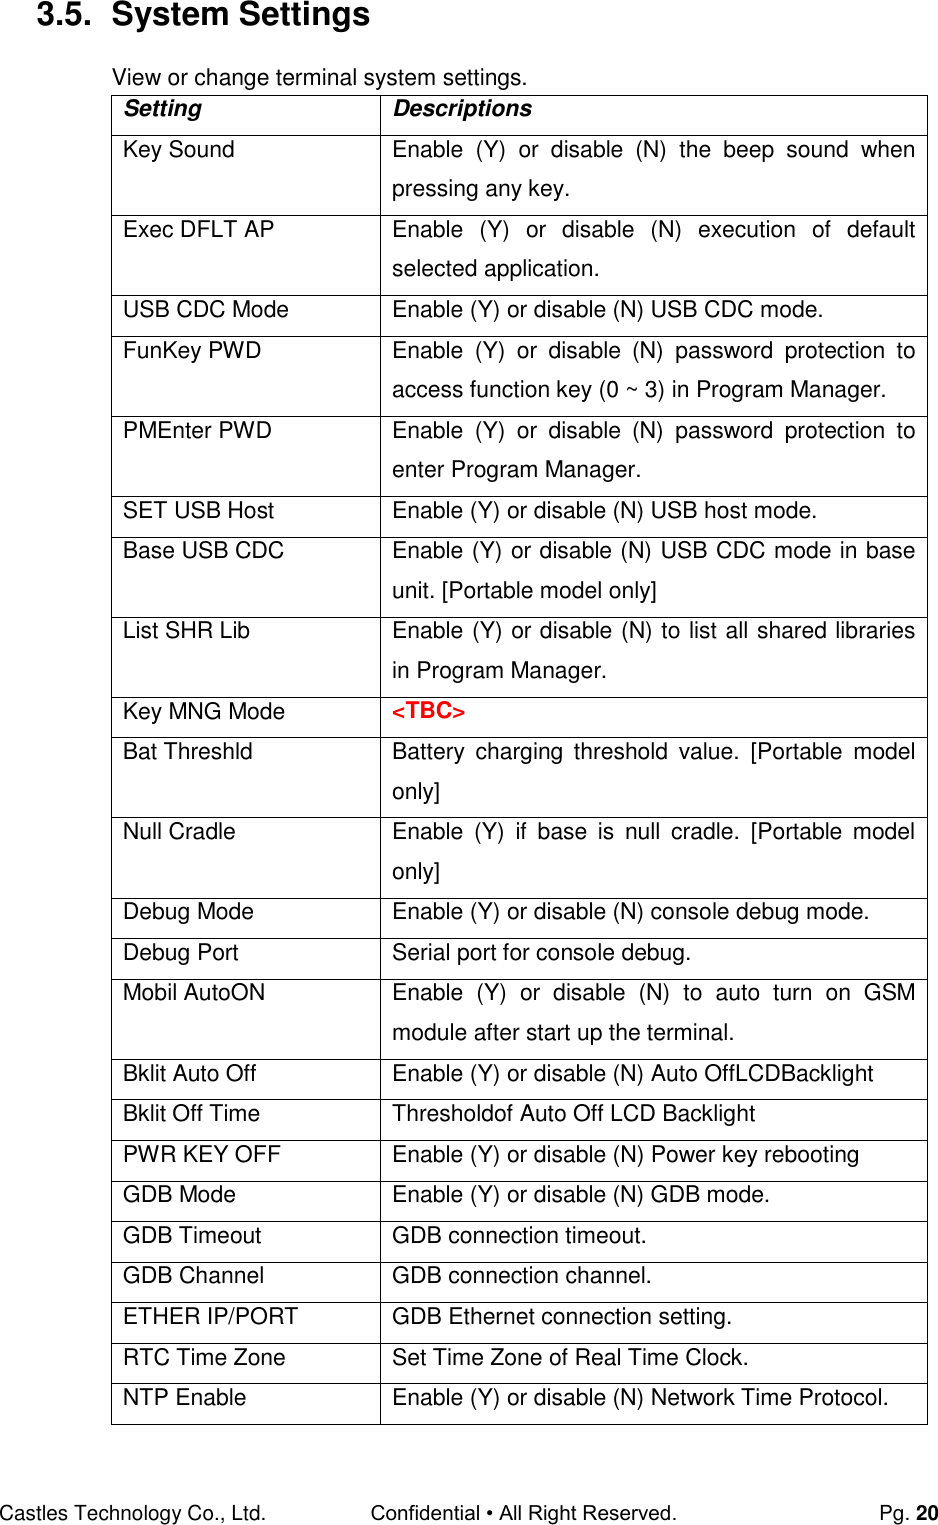 Castles Technology Co., Ltd. Confidential • All Right Reserved.  Pg. 20 3.5.  System Settings View or change terminal system settings. Setting Descriptions Key Sound Enable  (Y)  or  disable  (N)  the  beep  sound  when pressing any key. Exec DFLT AP Enable  (Y)  or  disable  (N)  execution  of  default selected application. USB CDC Mode Enable (Y) or disable (N) USB CDC mode. FunKey PWD Enable  (Y)  or  disable  (N)  password  protection  to access function key (0 ~ 3) in Program Manager. PMEnter PWD Enable  (Y)  or  disable  (N)  password  protection  to enter Program Manager. SET USB Host Enable (Y) or disable (N) USB host mode. Base USB CDC Enable (Y) or disable (N) USB CDC mode in base unit. [Portable model only] List SHR Lib Enable (Y) or disable (N) to list all shared libraries in Program Manager. Key MNG Mode &lt;TBC&gt; Bat Threshld Battery  charging  threshold  value.  [Portable  model only] Null Cradle Enable  (Y)  if  base  is  null  cradle.  [Portable  model only] Debug Mode Enable (Y) or disable (N) console debug mode. Debug Port Serial port for console debug. Mobil AutoON Enable  (Y)  or  disable  (N)  to  auto  turn  on  GSM module after start up the terminal. Bklit Auto Off Enable (Y) or disable (N) Auto OffLCDBacklight Bklit Off Time Thresholdof Auto Off LCD Backlight PWR KEY OFF Enable (Y) or disable (N) Power key rebooting GDB Mode Enable (Y) or disable (N) GDB mode. GDB Timeout GDB connection timeout. GDB Channel GDB connection channel. ETHER IP/PORT GDB Ethernet connection setting. RTC Time Zone Set Time Zone of Real Time Clock. NTP Enable Enable (Y) or disable (N) Network Time Protocol. 